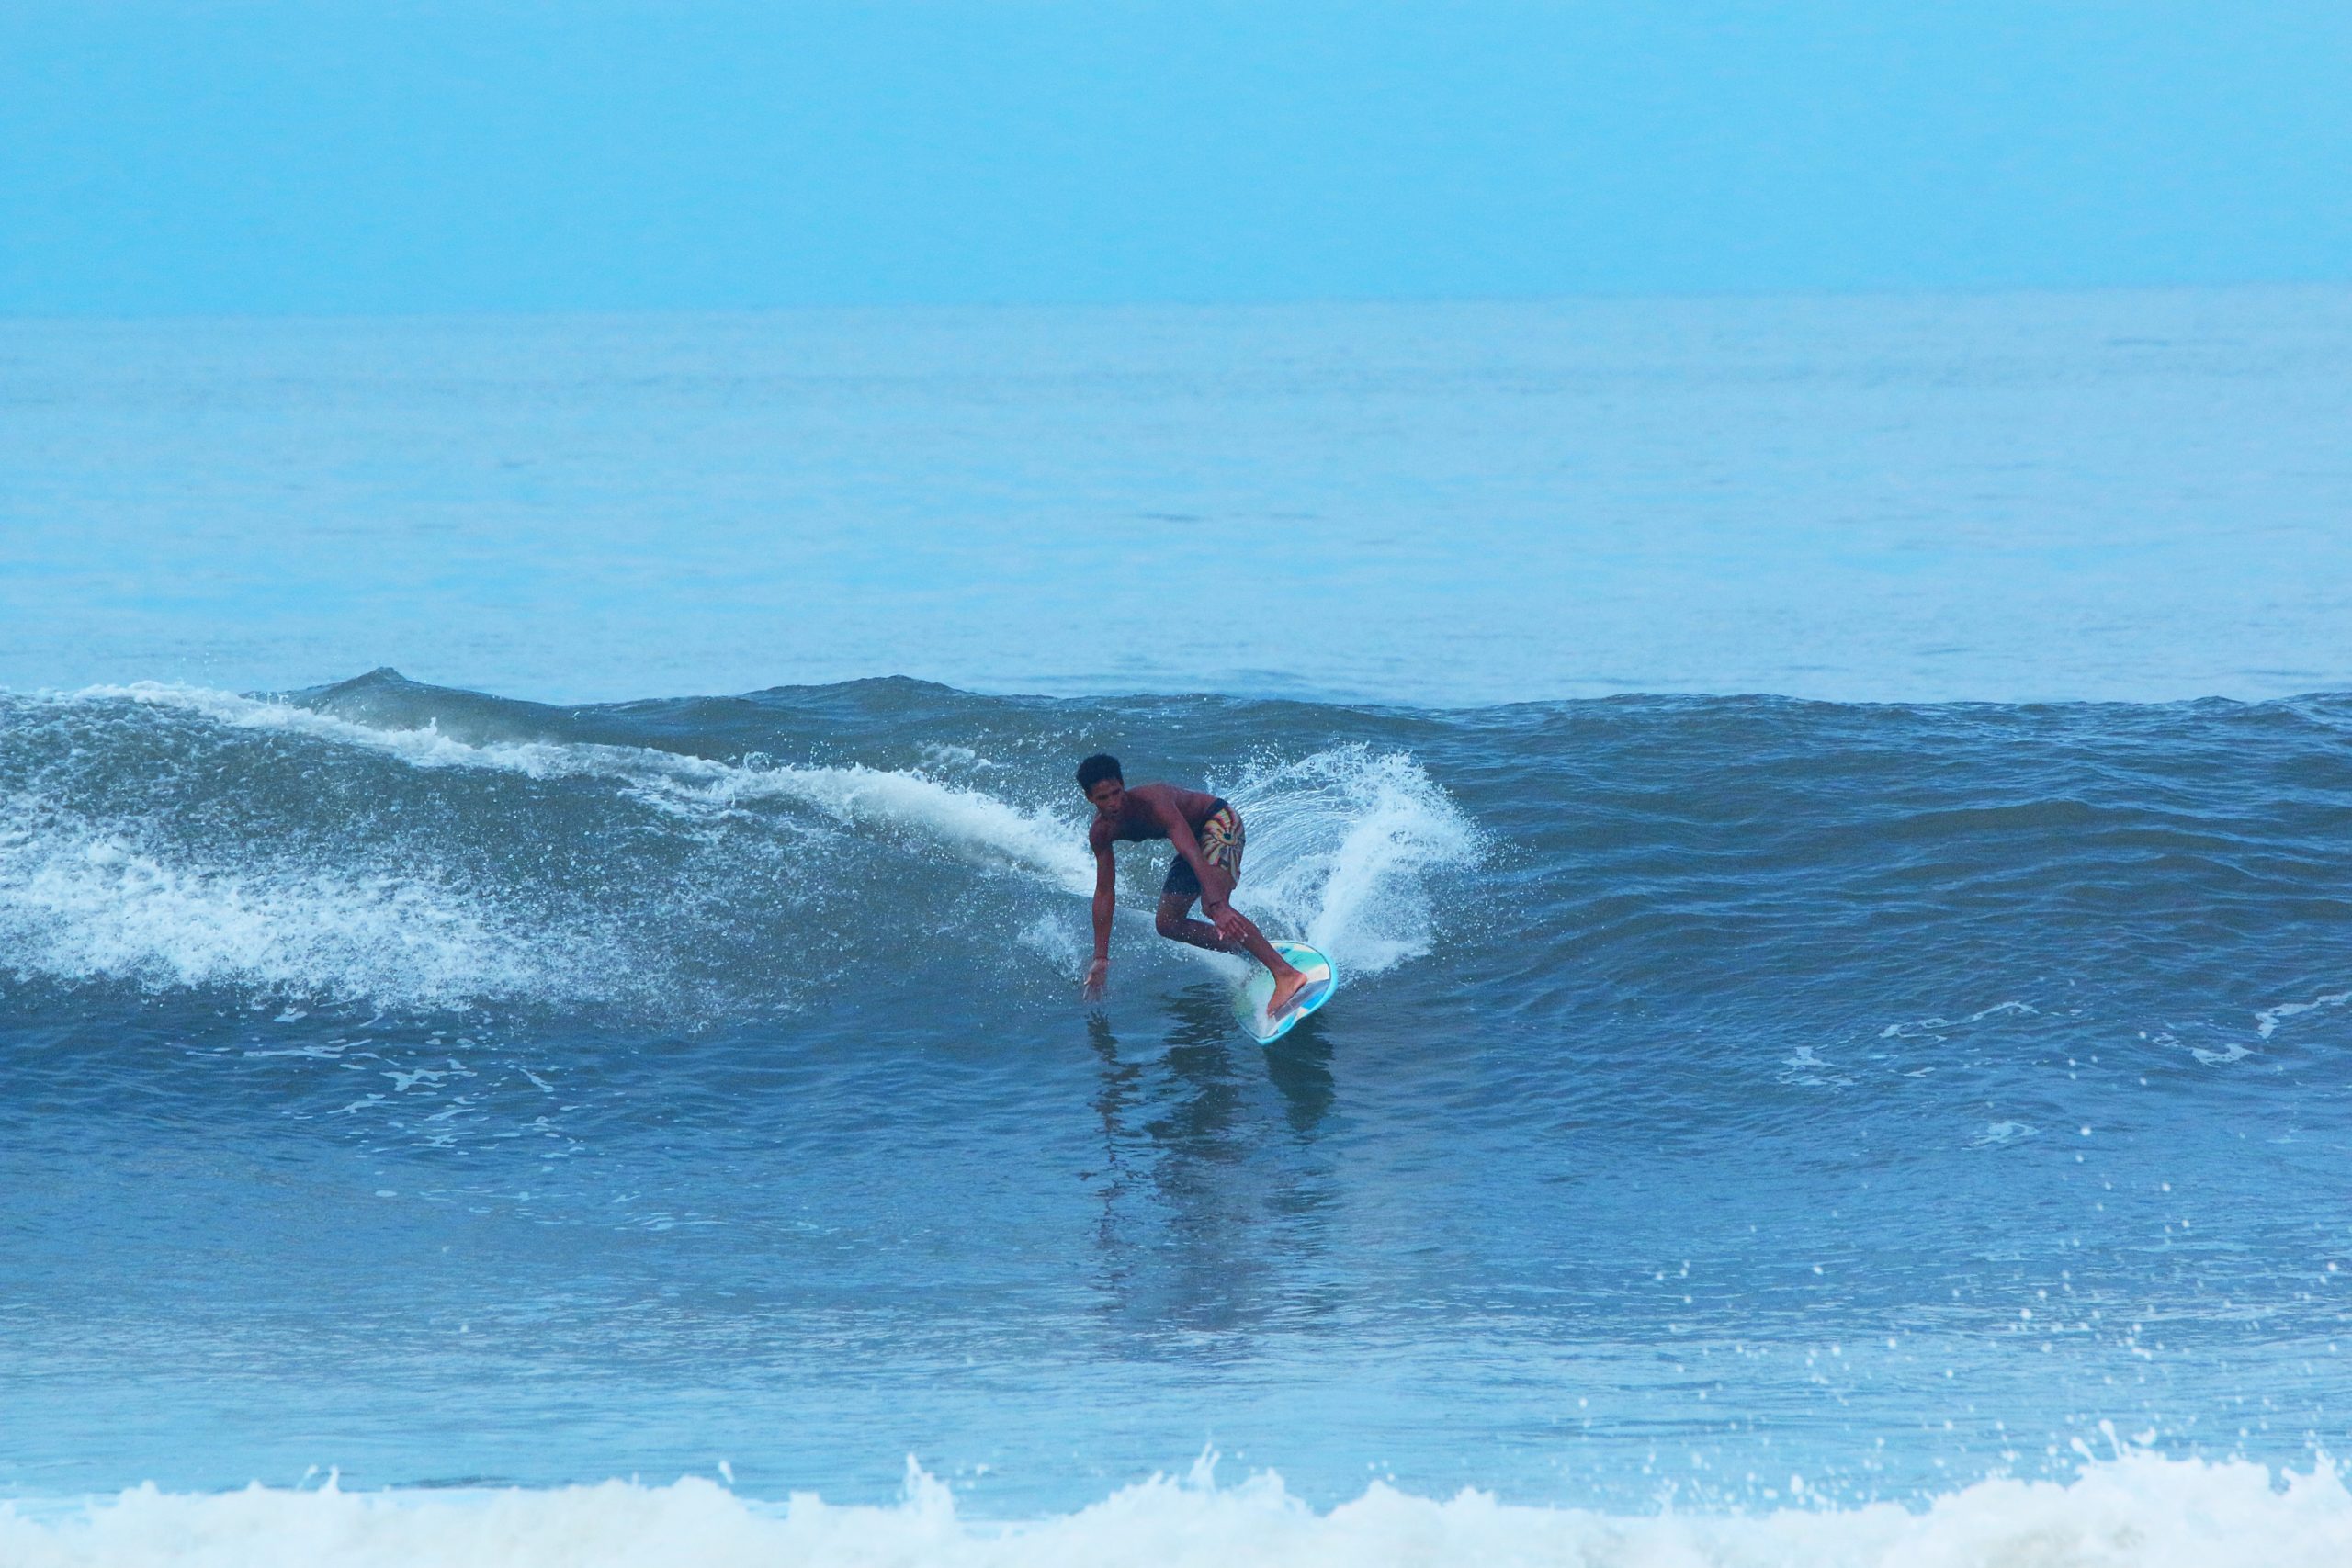 Surf’s up in Bali